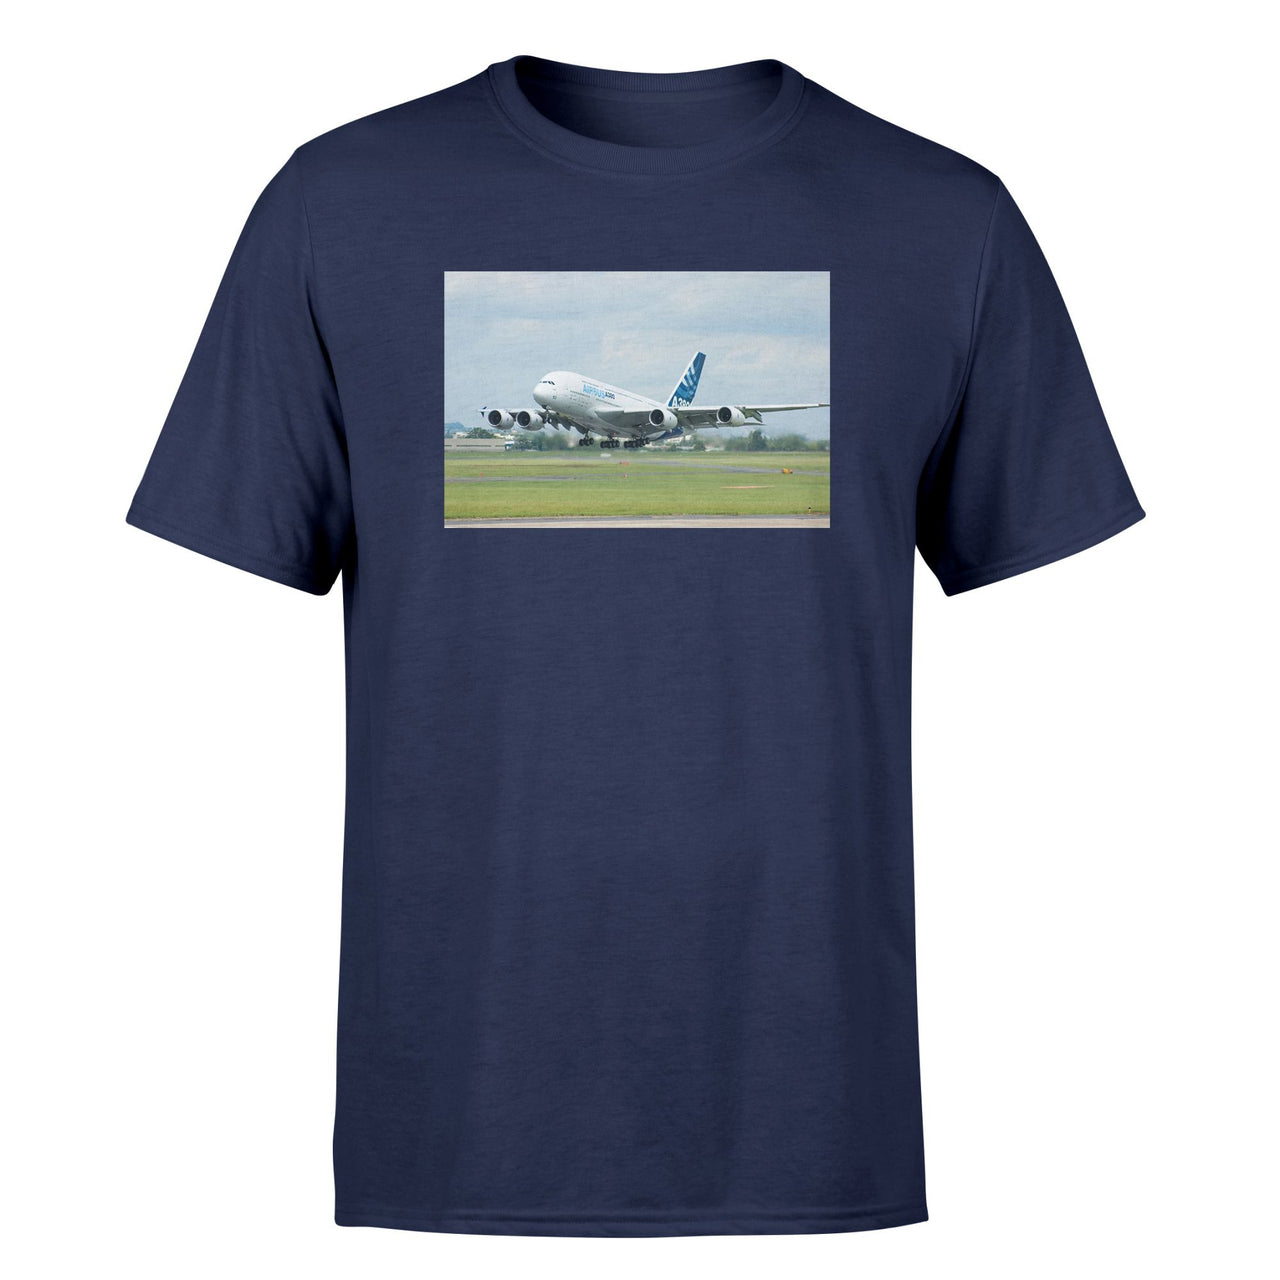 Departing Airbus A380 with Original Livery Designed T-Shirts